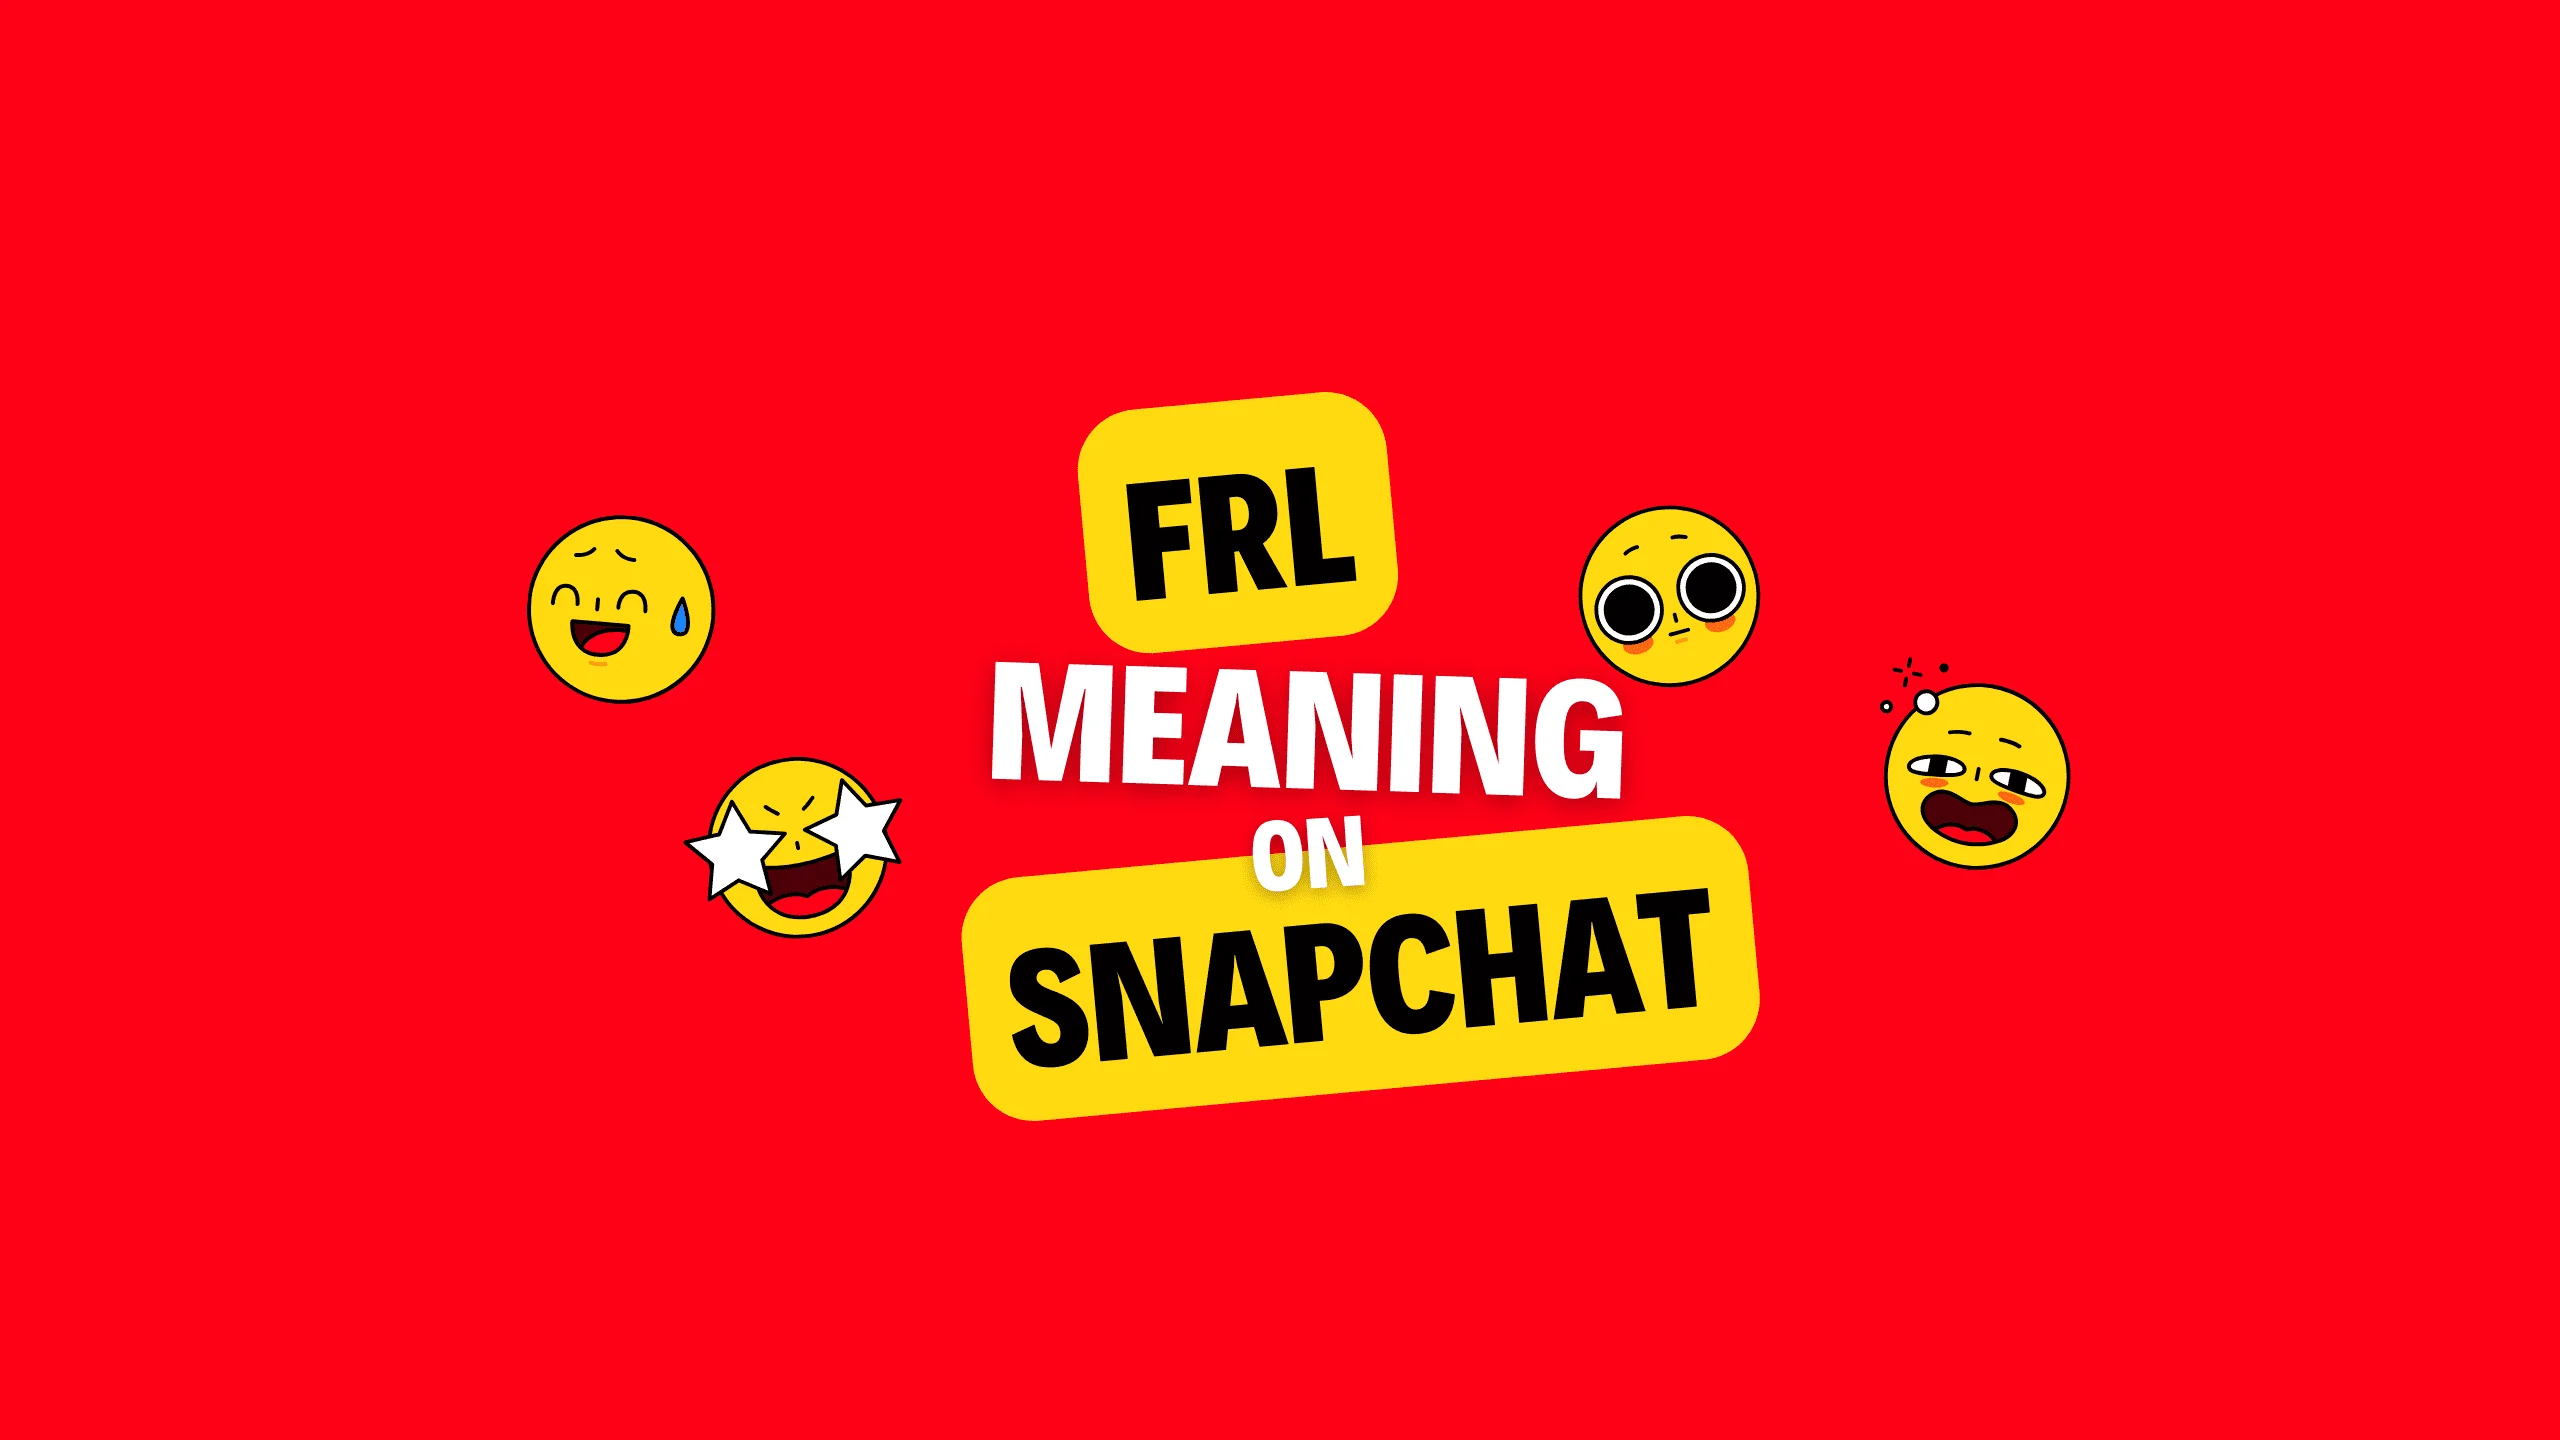 What does FRL mean on Snapchat